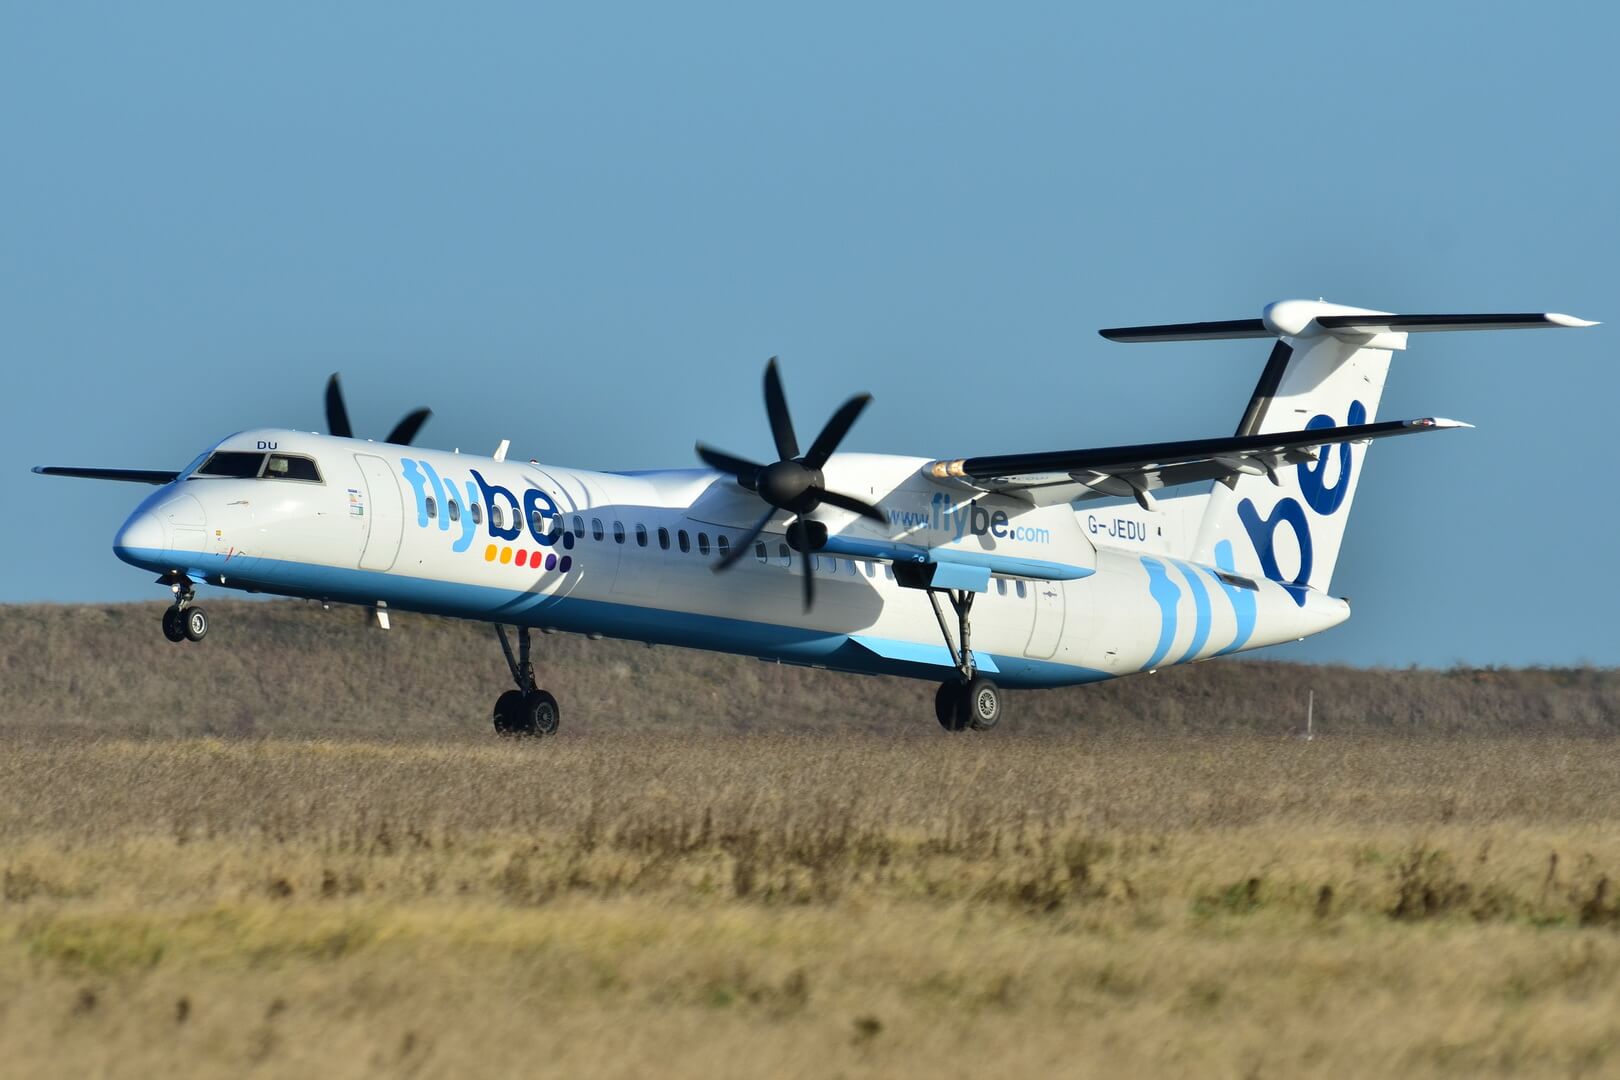 Canadian start-up airline Connect Airlines will take ex-Flybe air